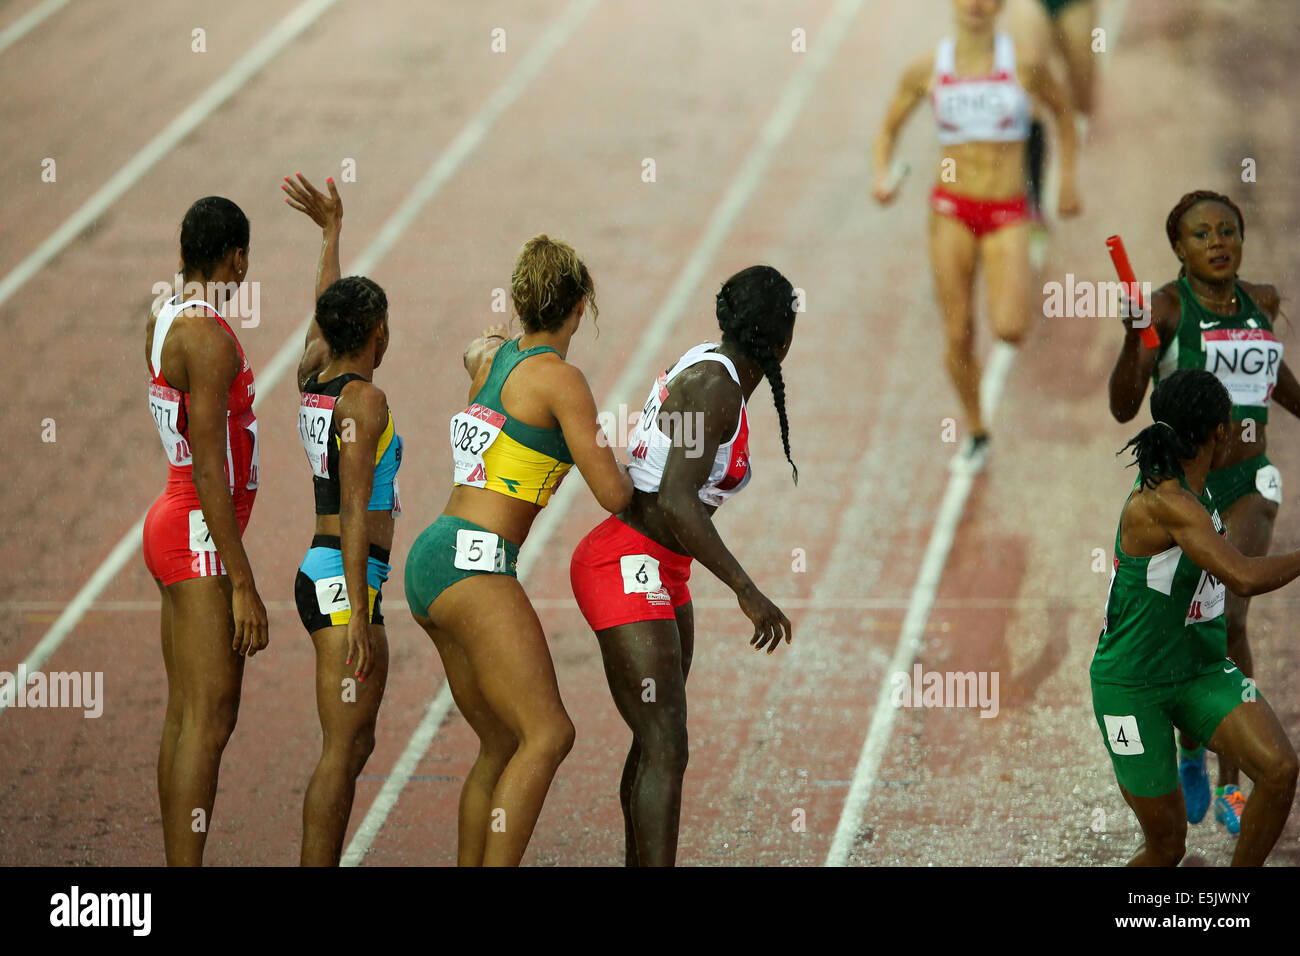 Hampden Park Glasgow 2 August 2014. Commonwealth Games day 10 Athletics.   Women's 4x400m relay final. 1st - Jamaica; 2nd - Nigeria; 3rd - England Credit:  ALAN OLIVER/Alamy Live News Stock Photo